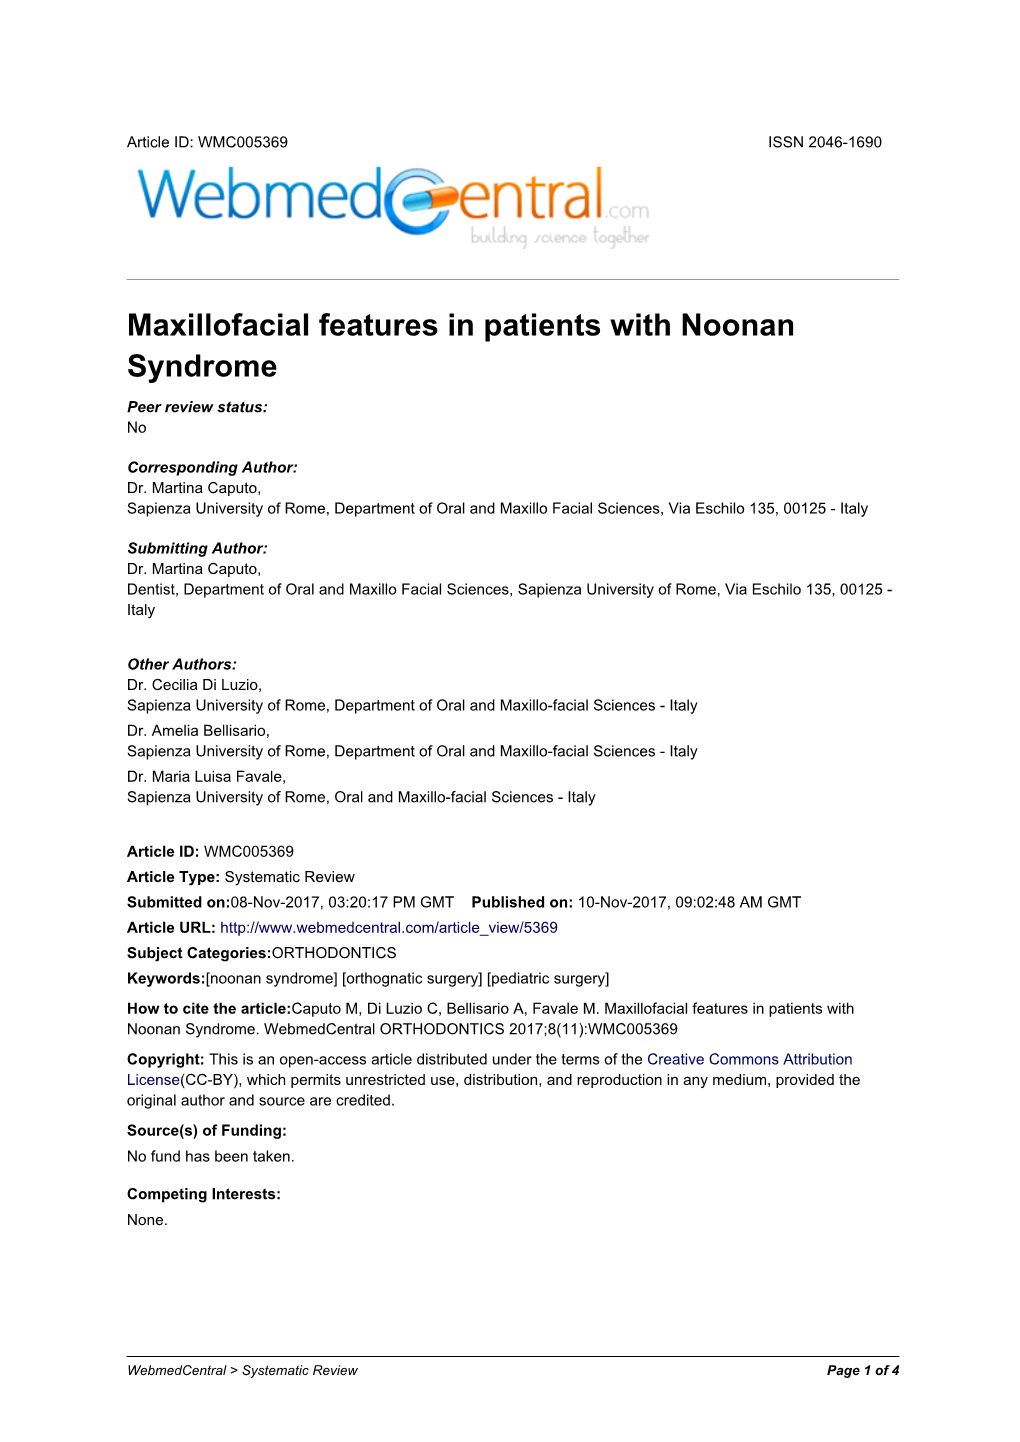 Maxillofacial Features in Patients with Noonan Syndrome